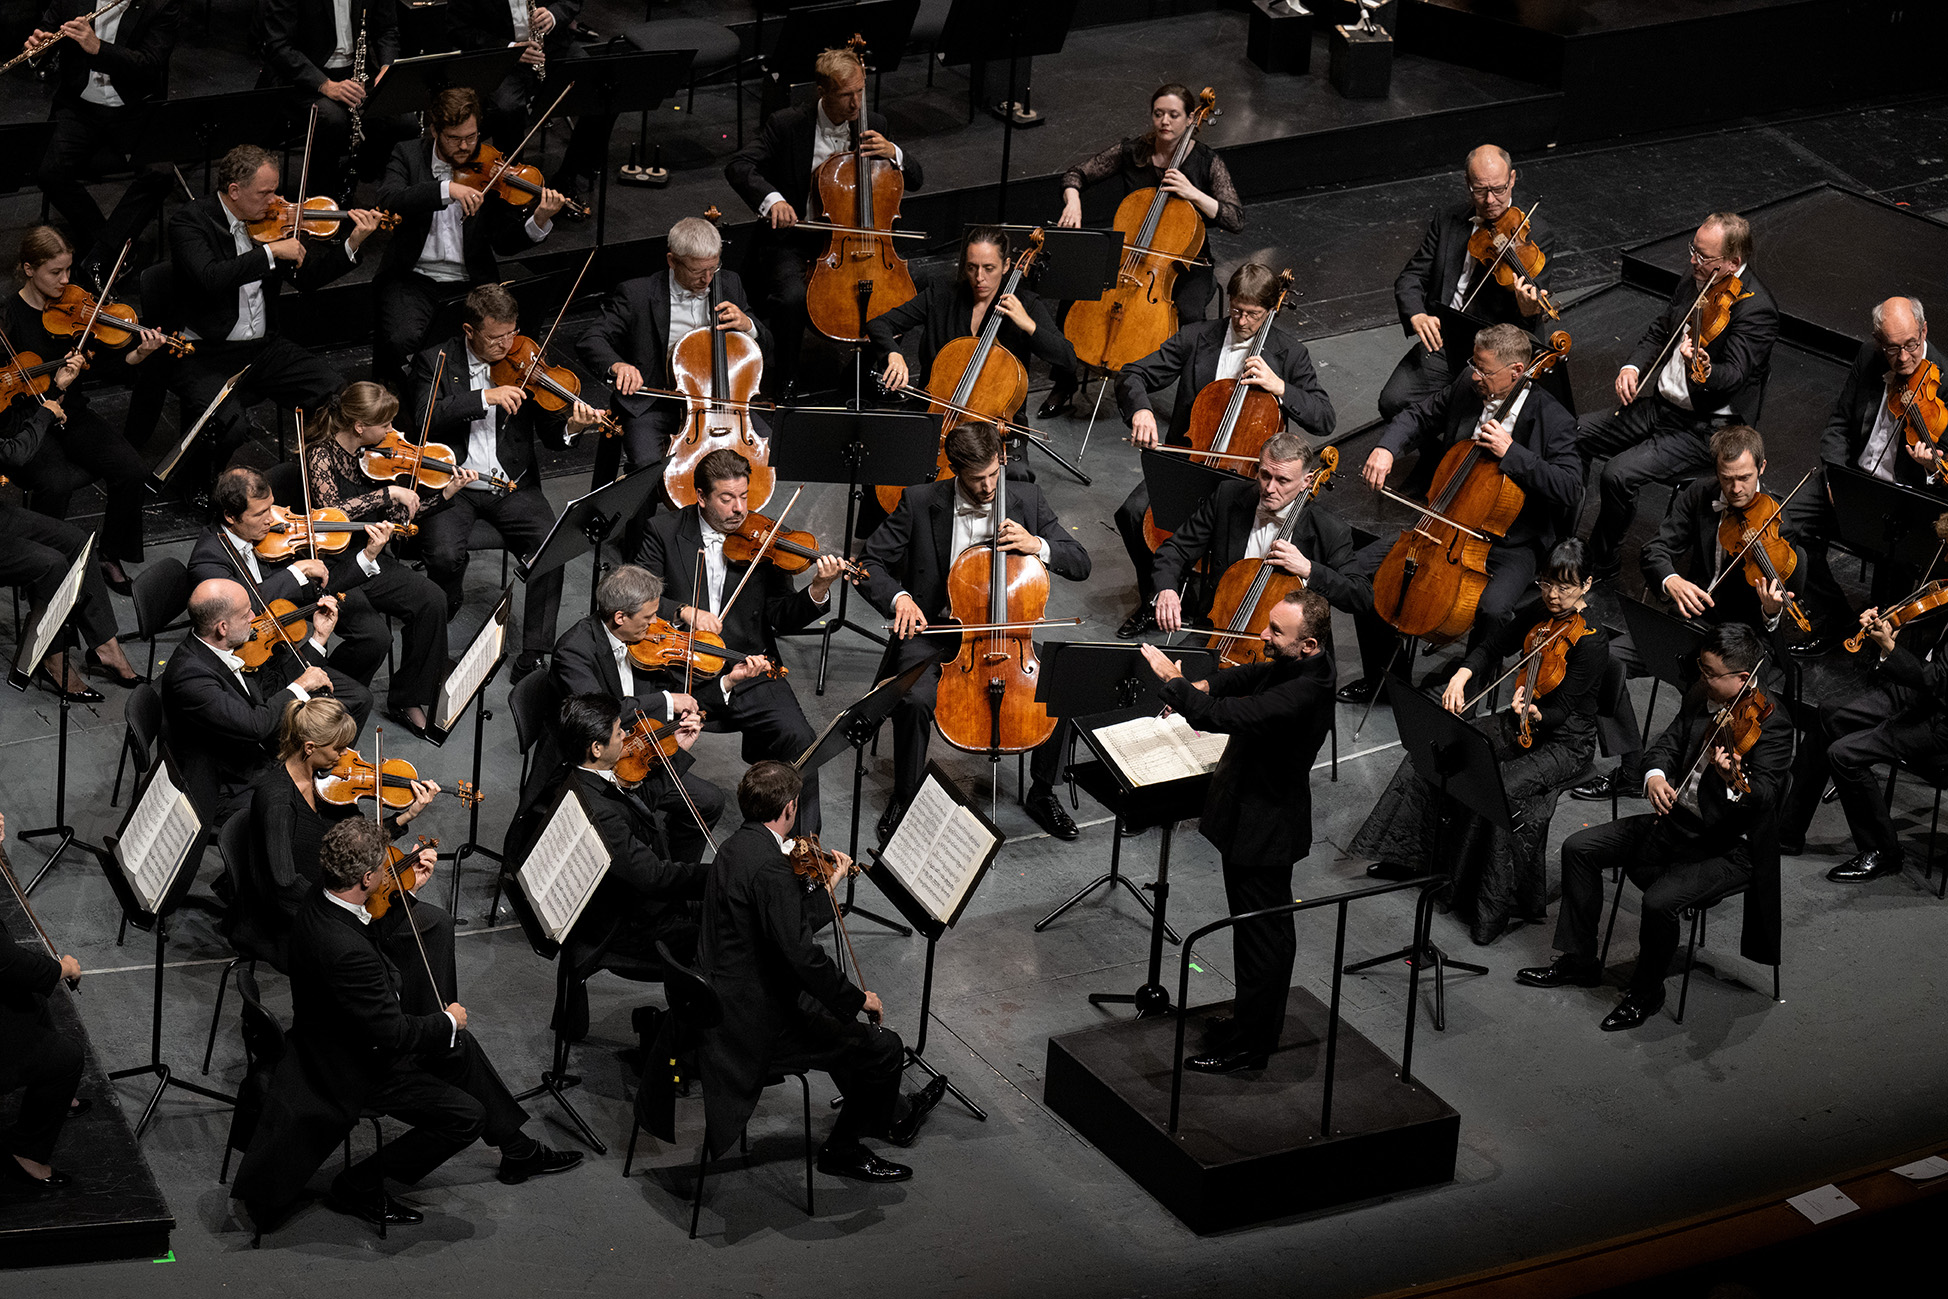 Man conducting the orchestra during a concert